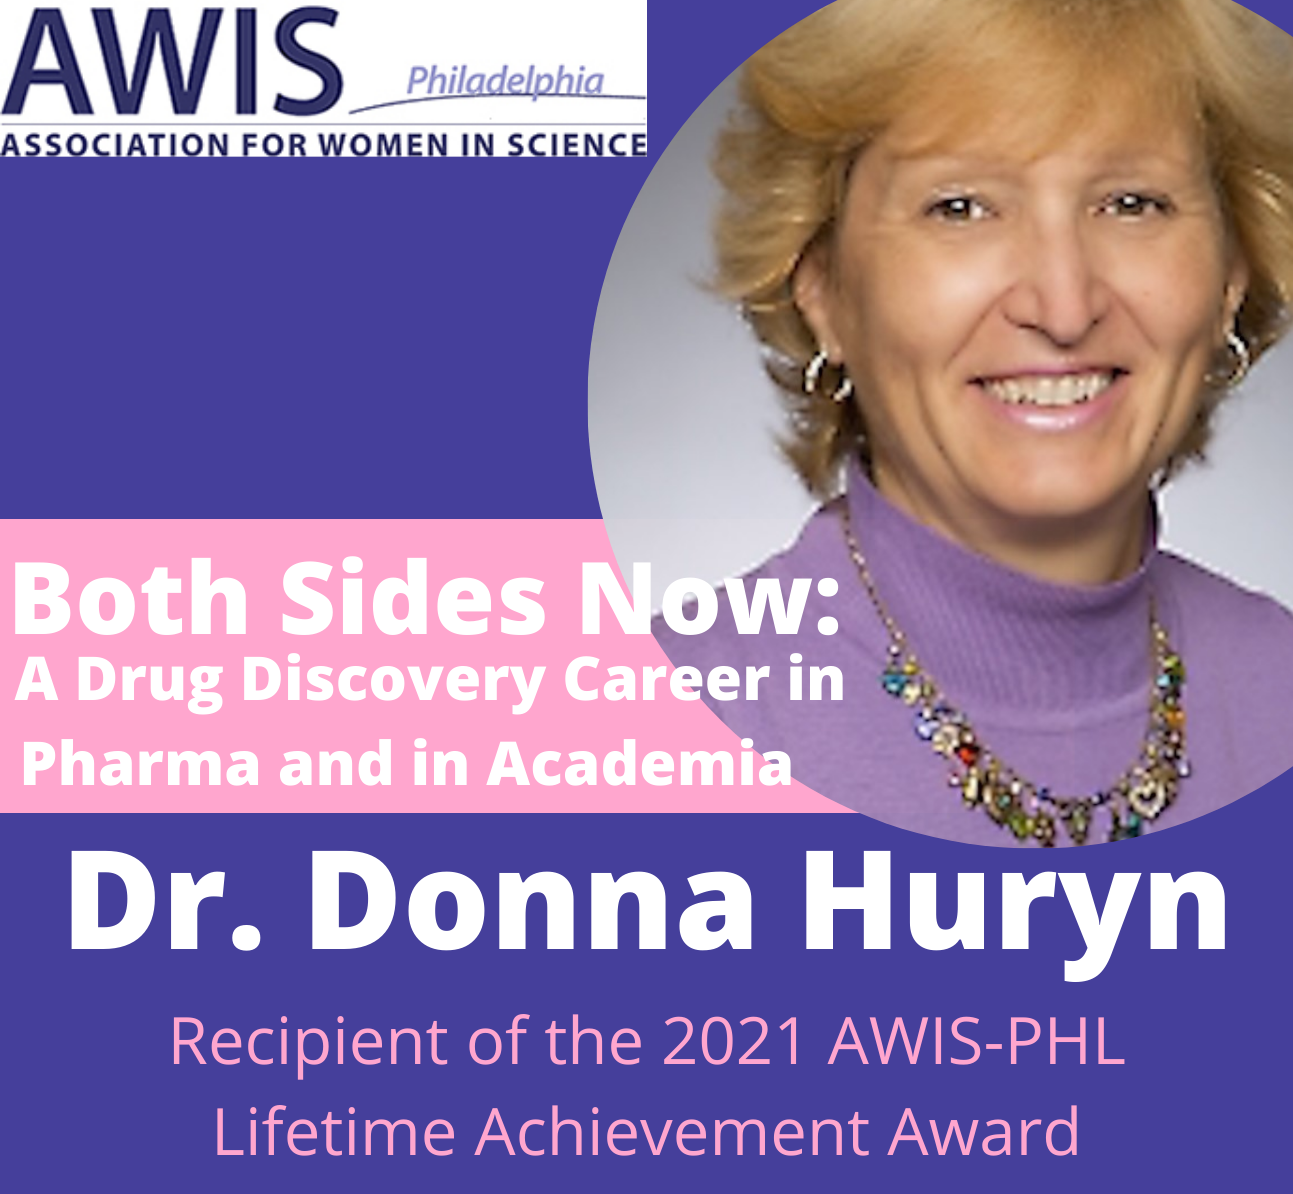 AWIS of Philadelphia Event - Both Sides Now: A Drug Discovery Career in Pharma and in Academia